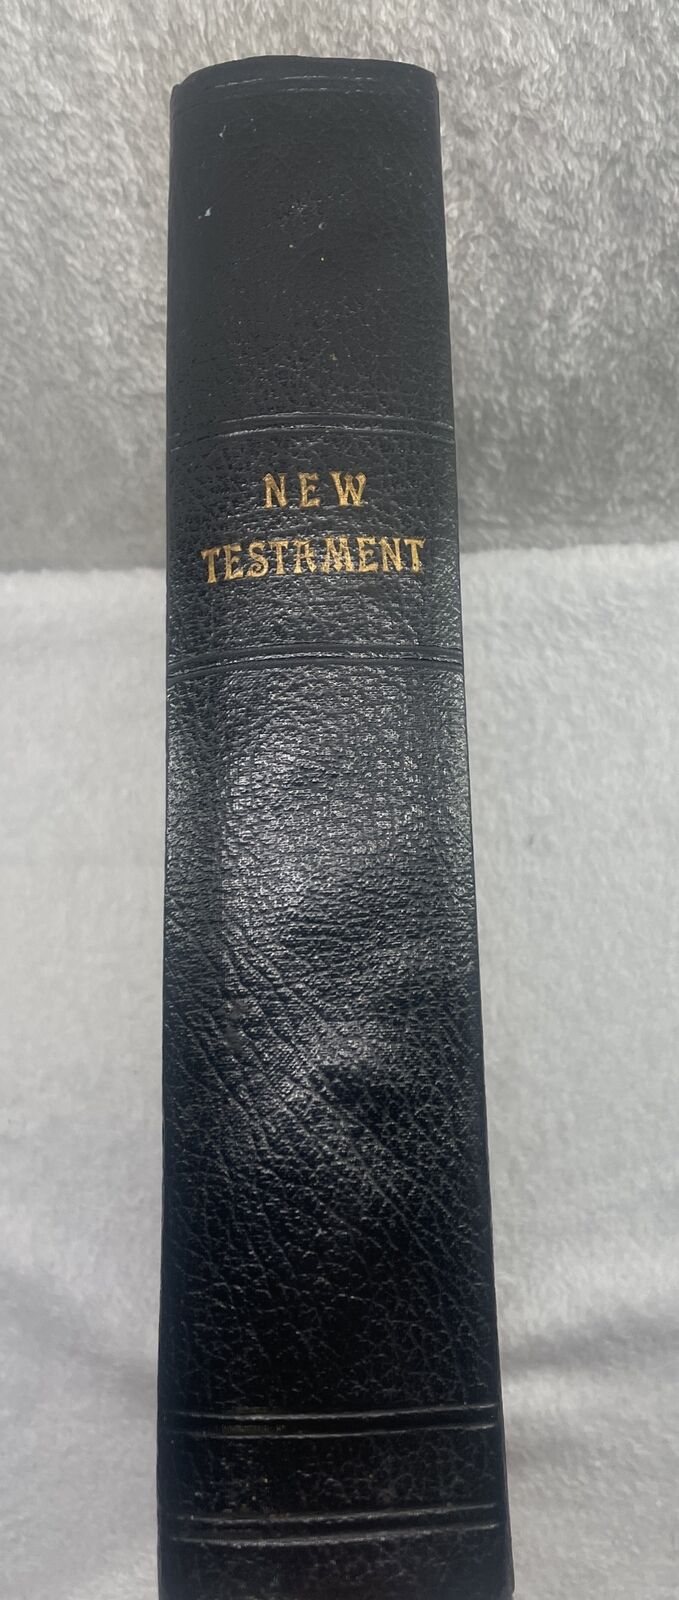 The Holy Bible New Testament Oversized Leather Bound The Complete Commentary